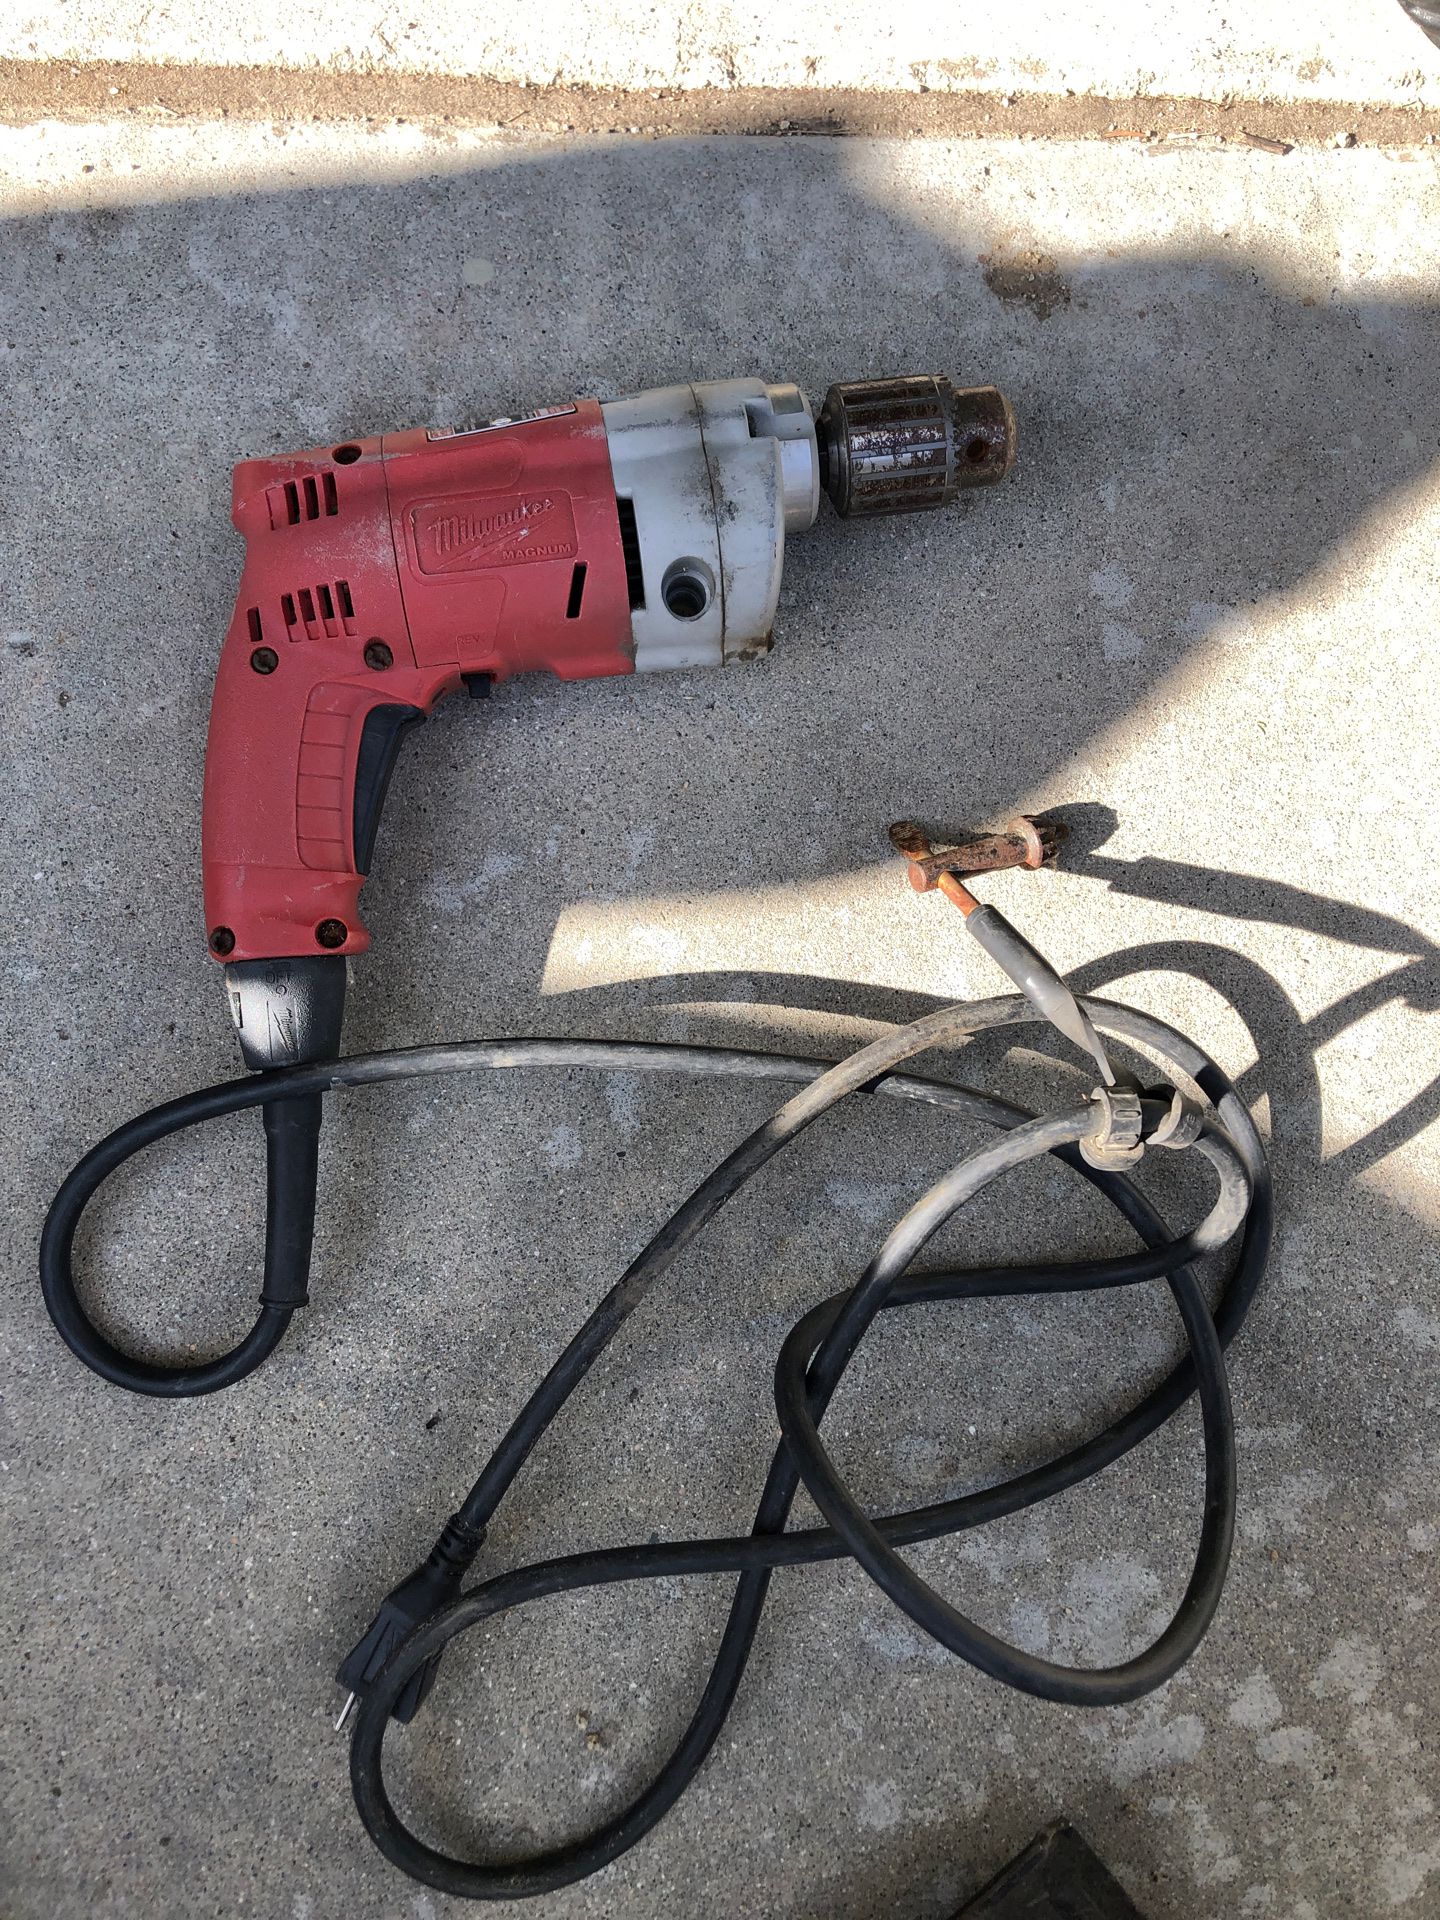 Milwaukee Drill with chord and chuck key